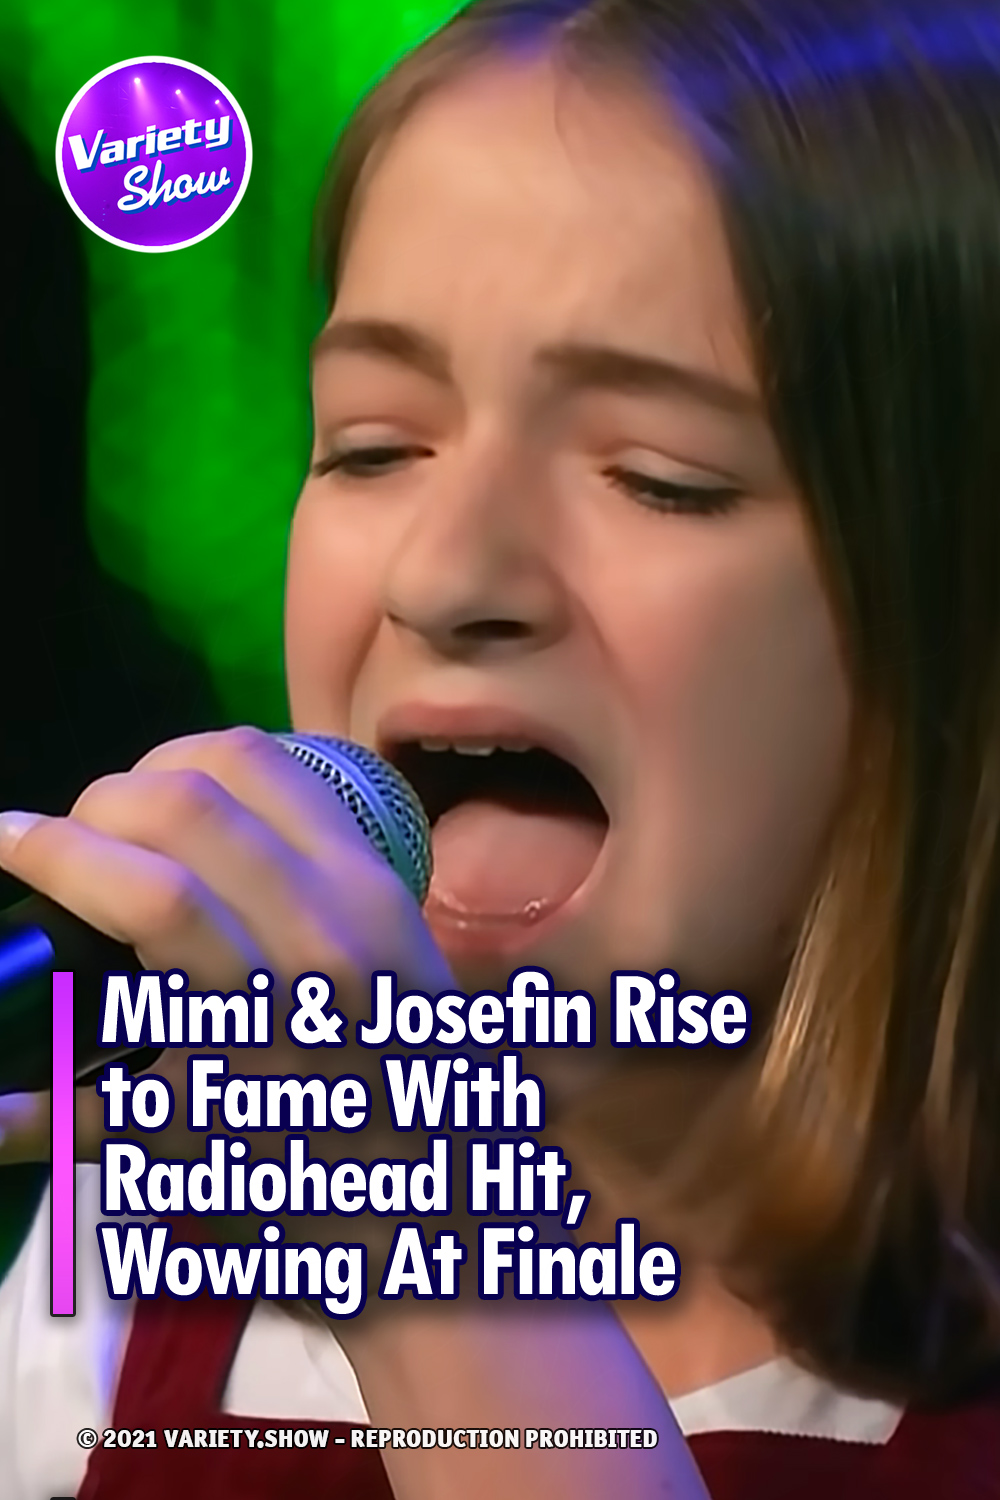 Mimi & Josefin Rise to Fame With Radiohead Hit, Wowing At Finale